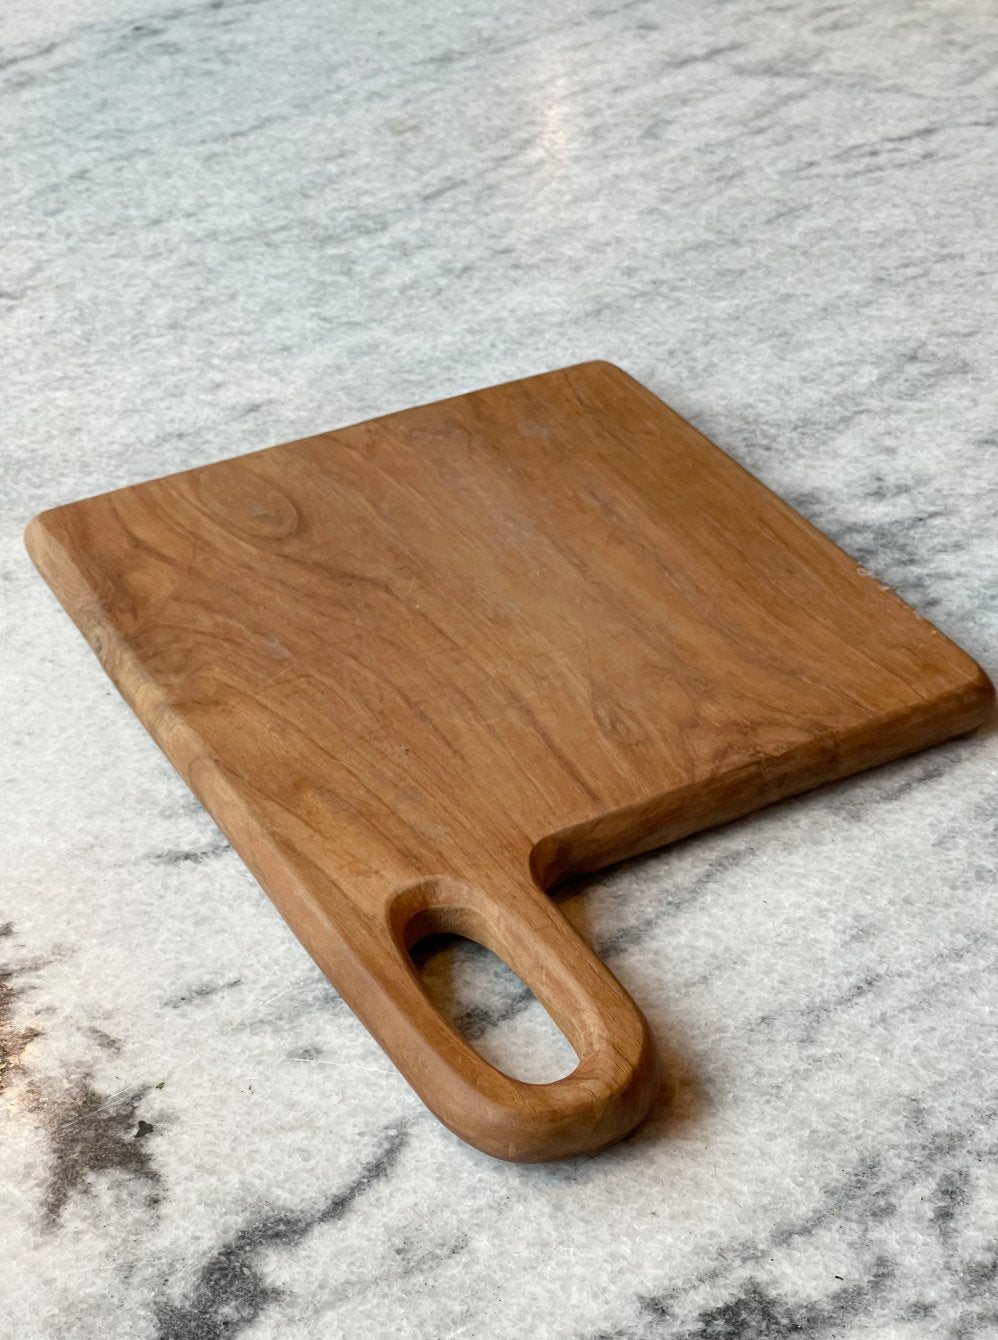 CUTTING BOARD  - TECK ROOTS living-furniture Mano Plata Small 10" x 10" with Handle 14"  